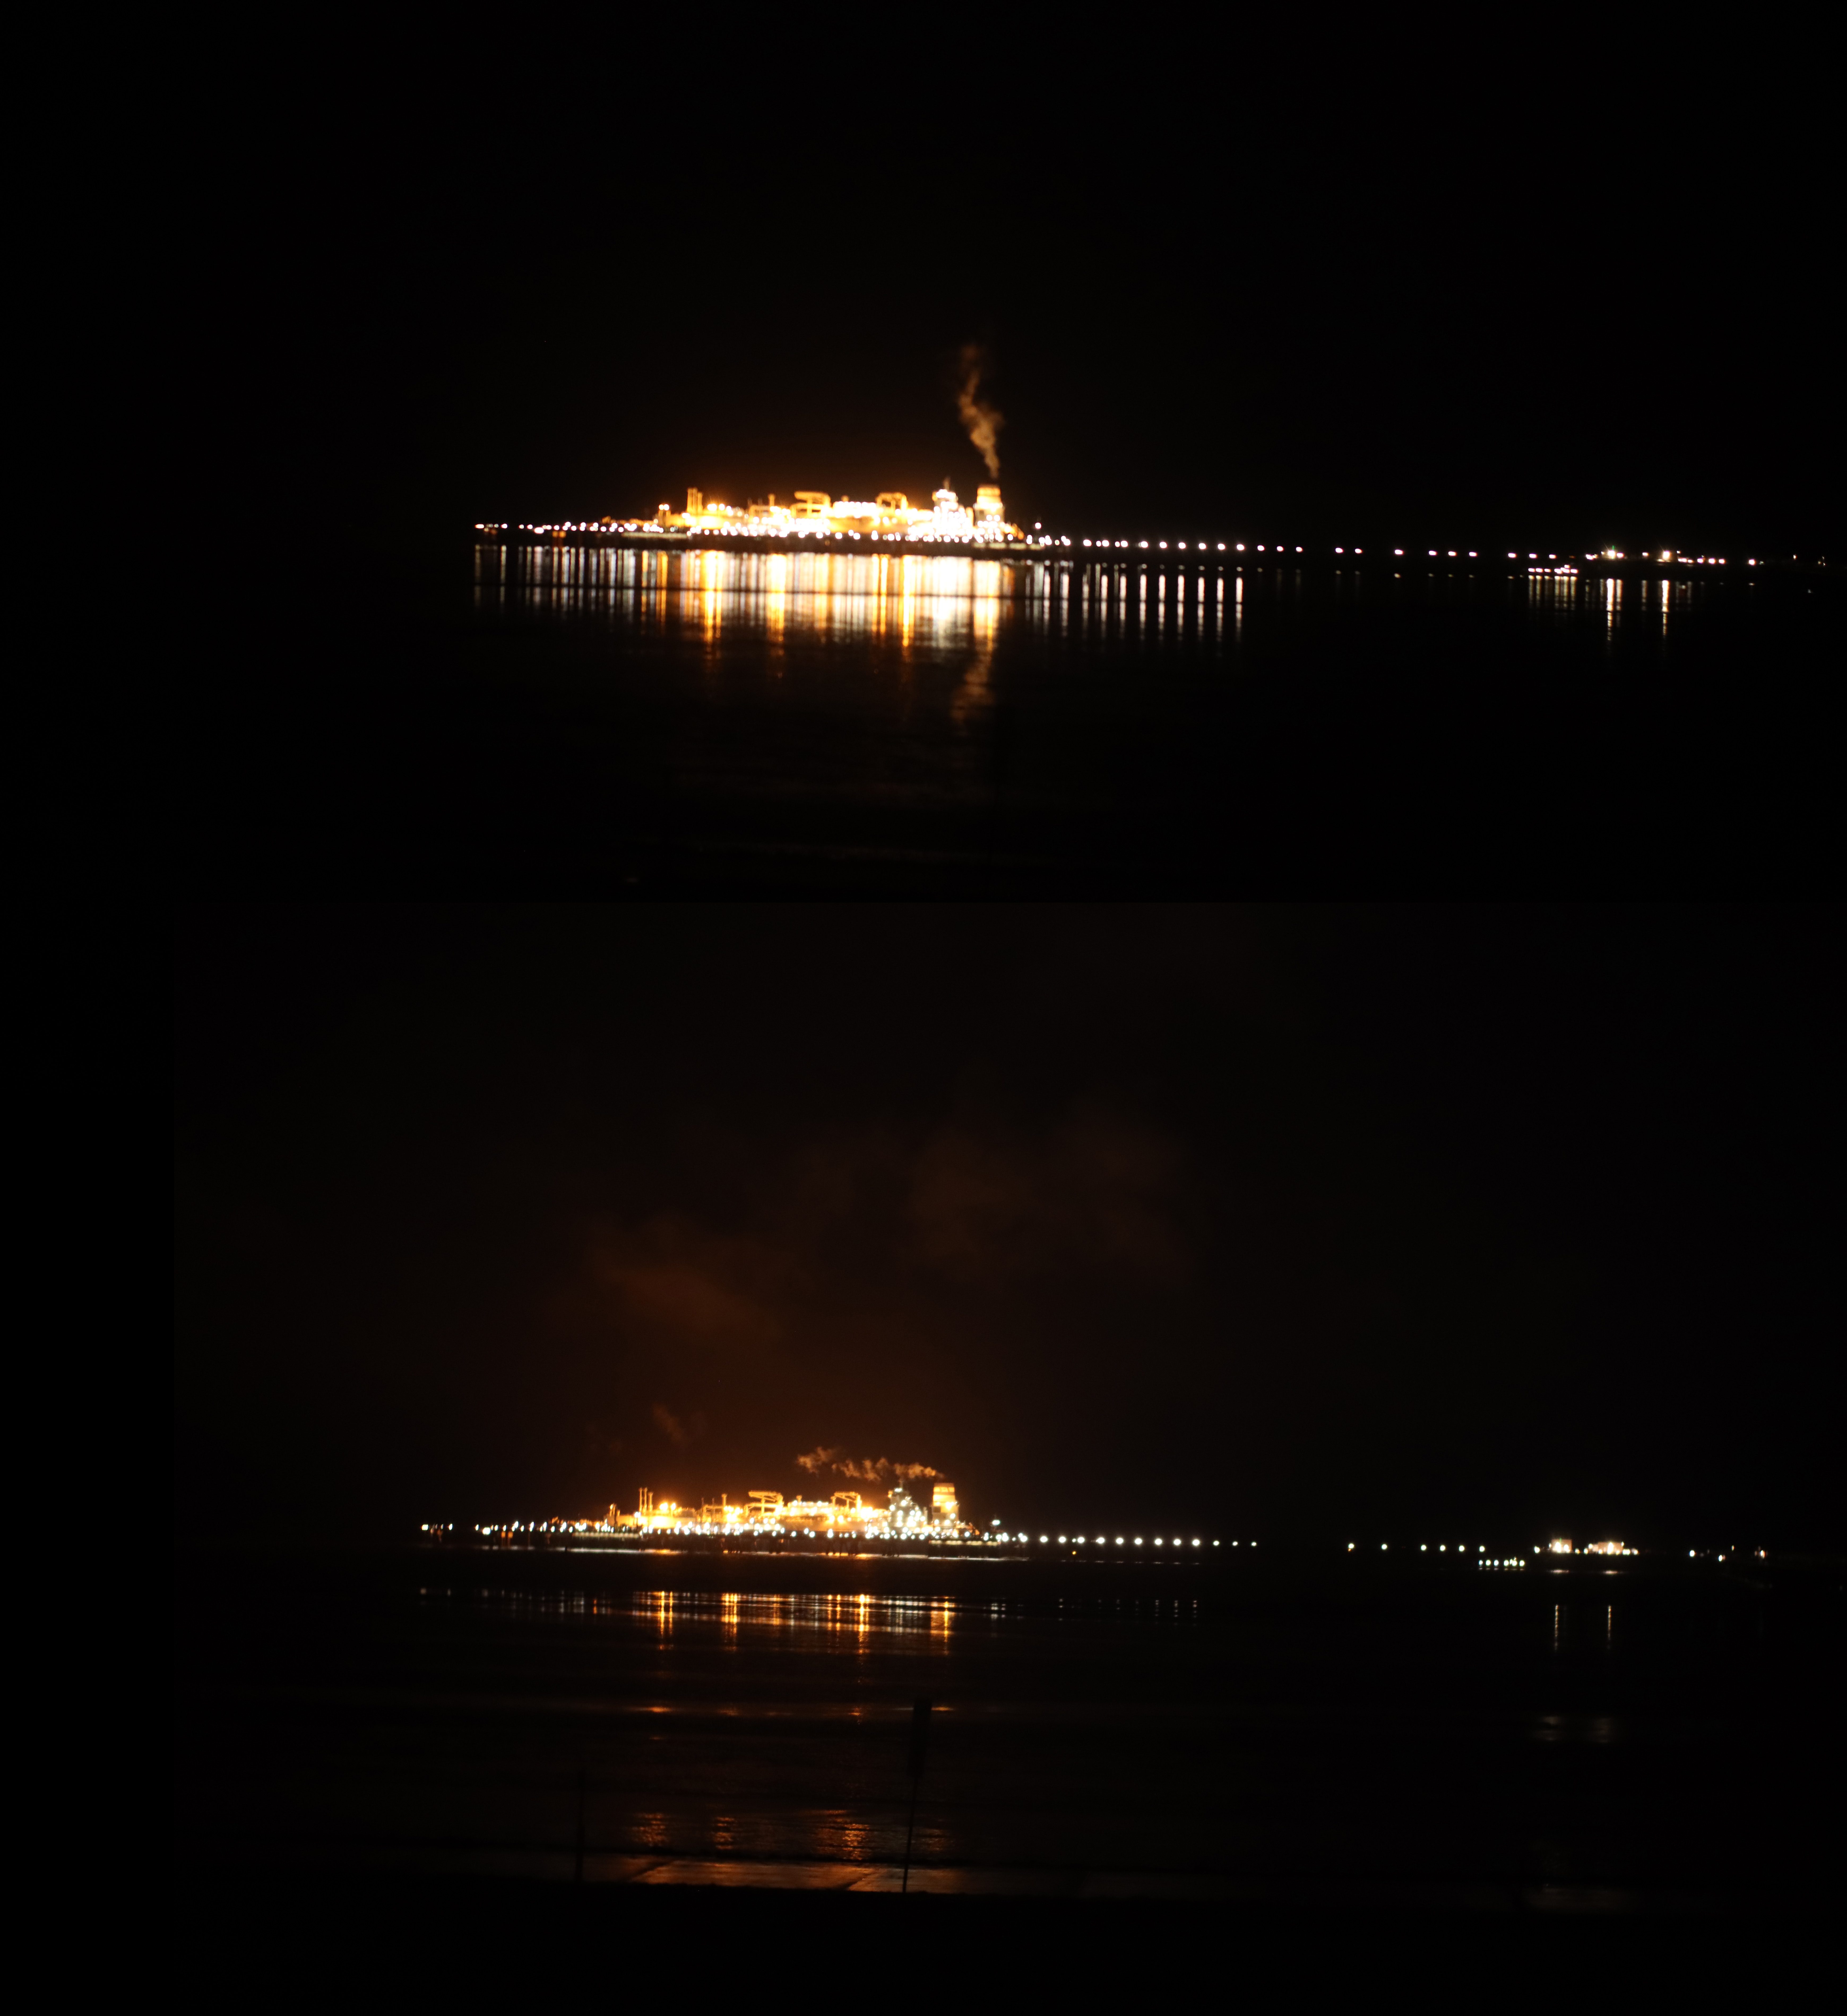 Figure 3: Comparing photos of the LNG-terminal before (above, 27.02.23) and after (below, 08.02.24) the light reduction (ISO 1600, f/1.8, 1/40 s), Andreas Hänel